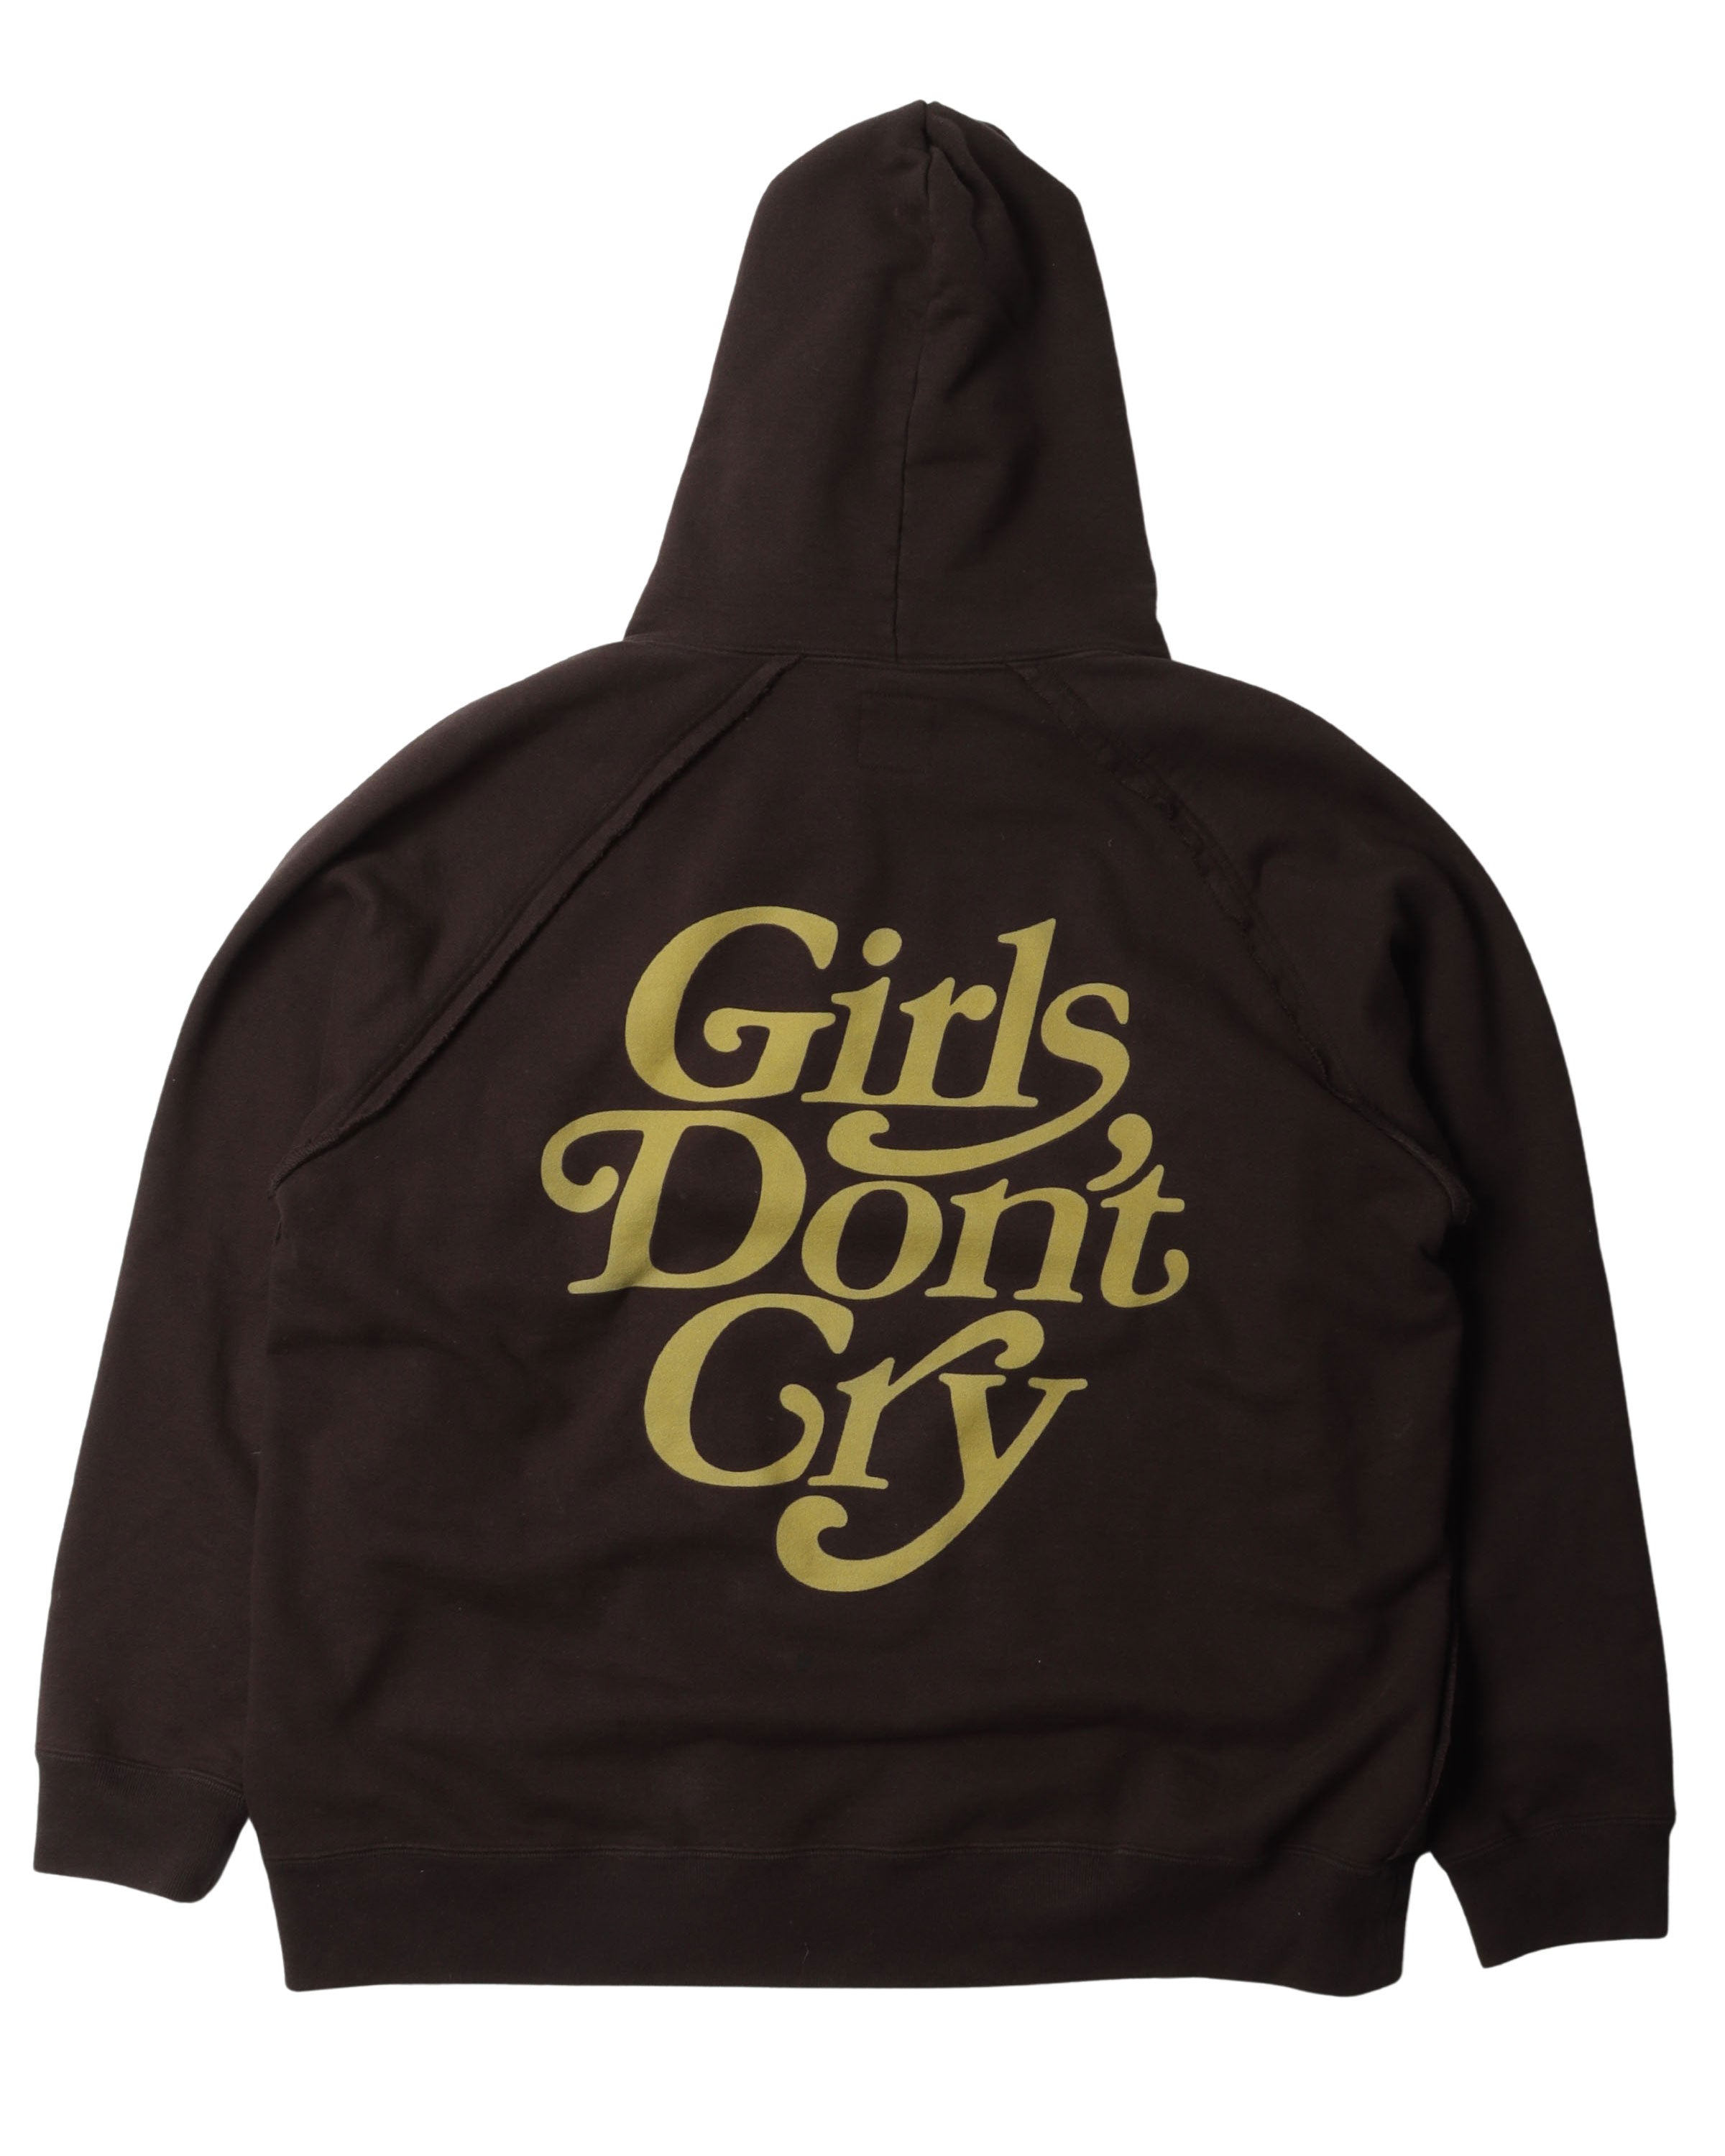 Needles Girls Don't Cry Hoodie